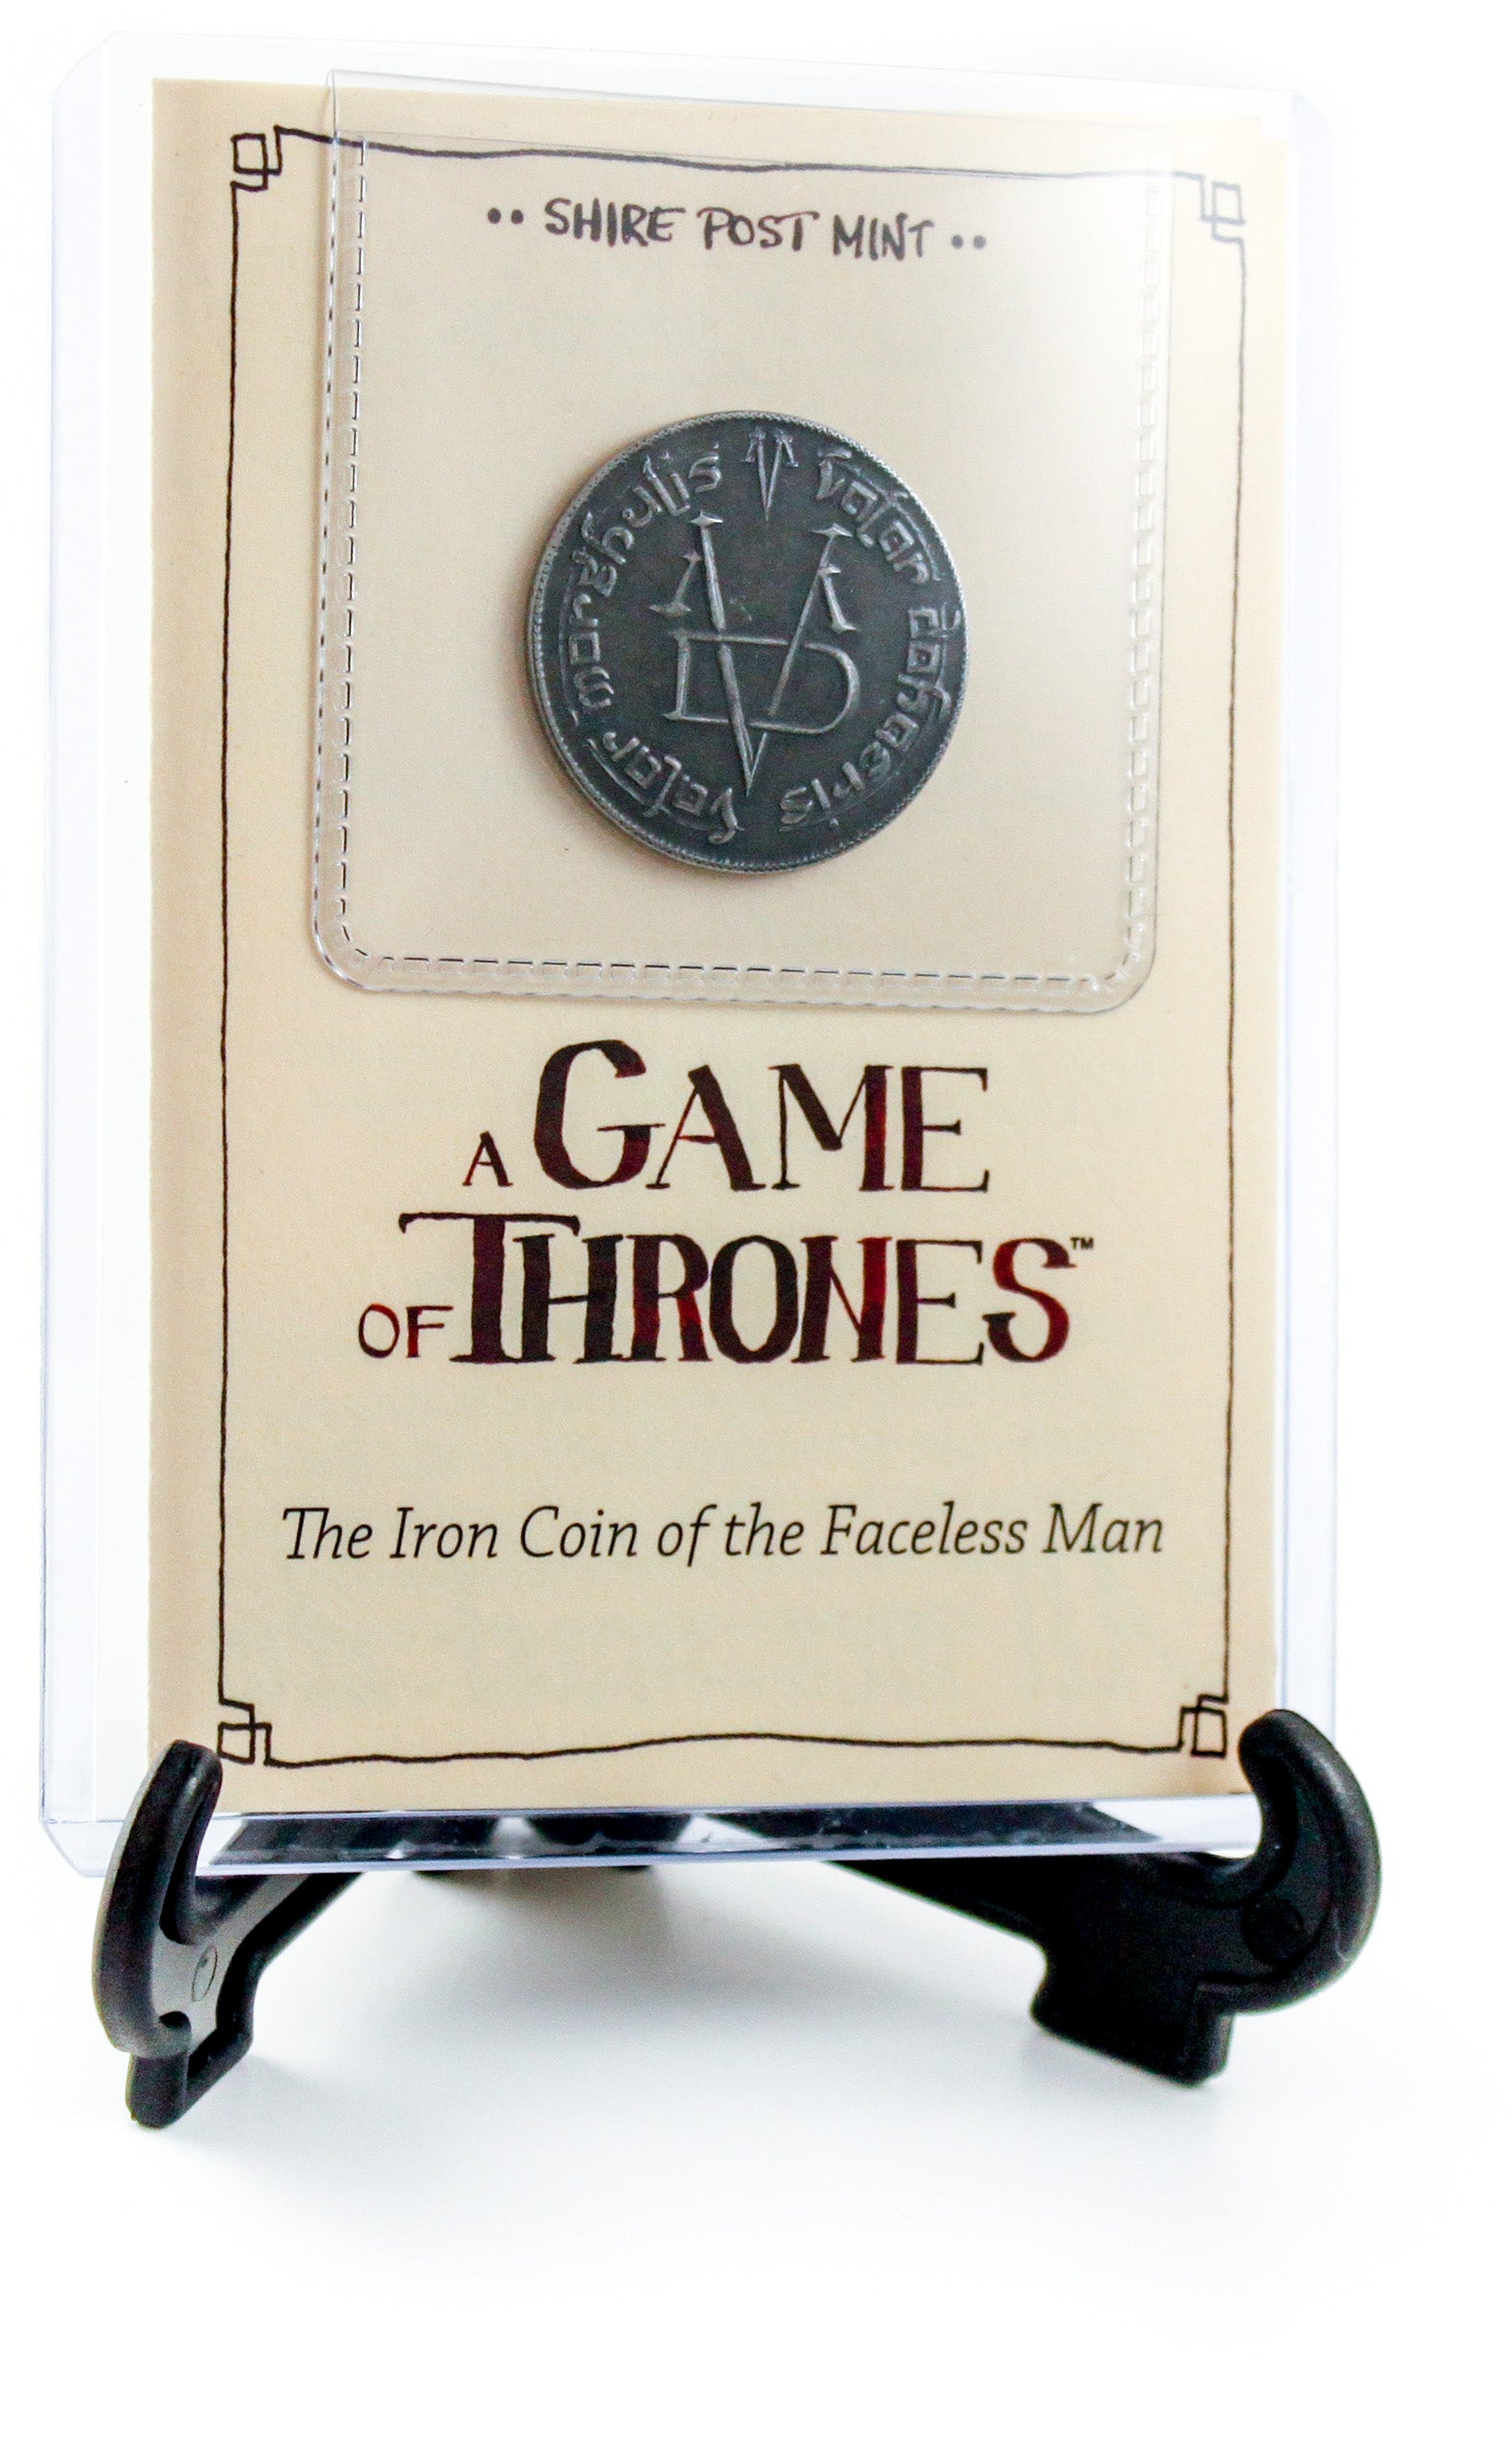 Iron Coin of the Faceless Man - Valar Morghulis - by Shire Post Mint